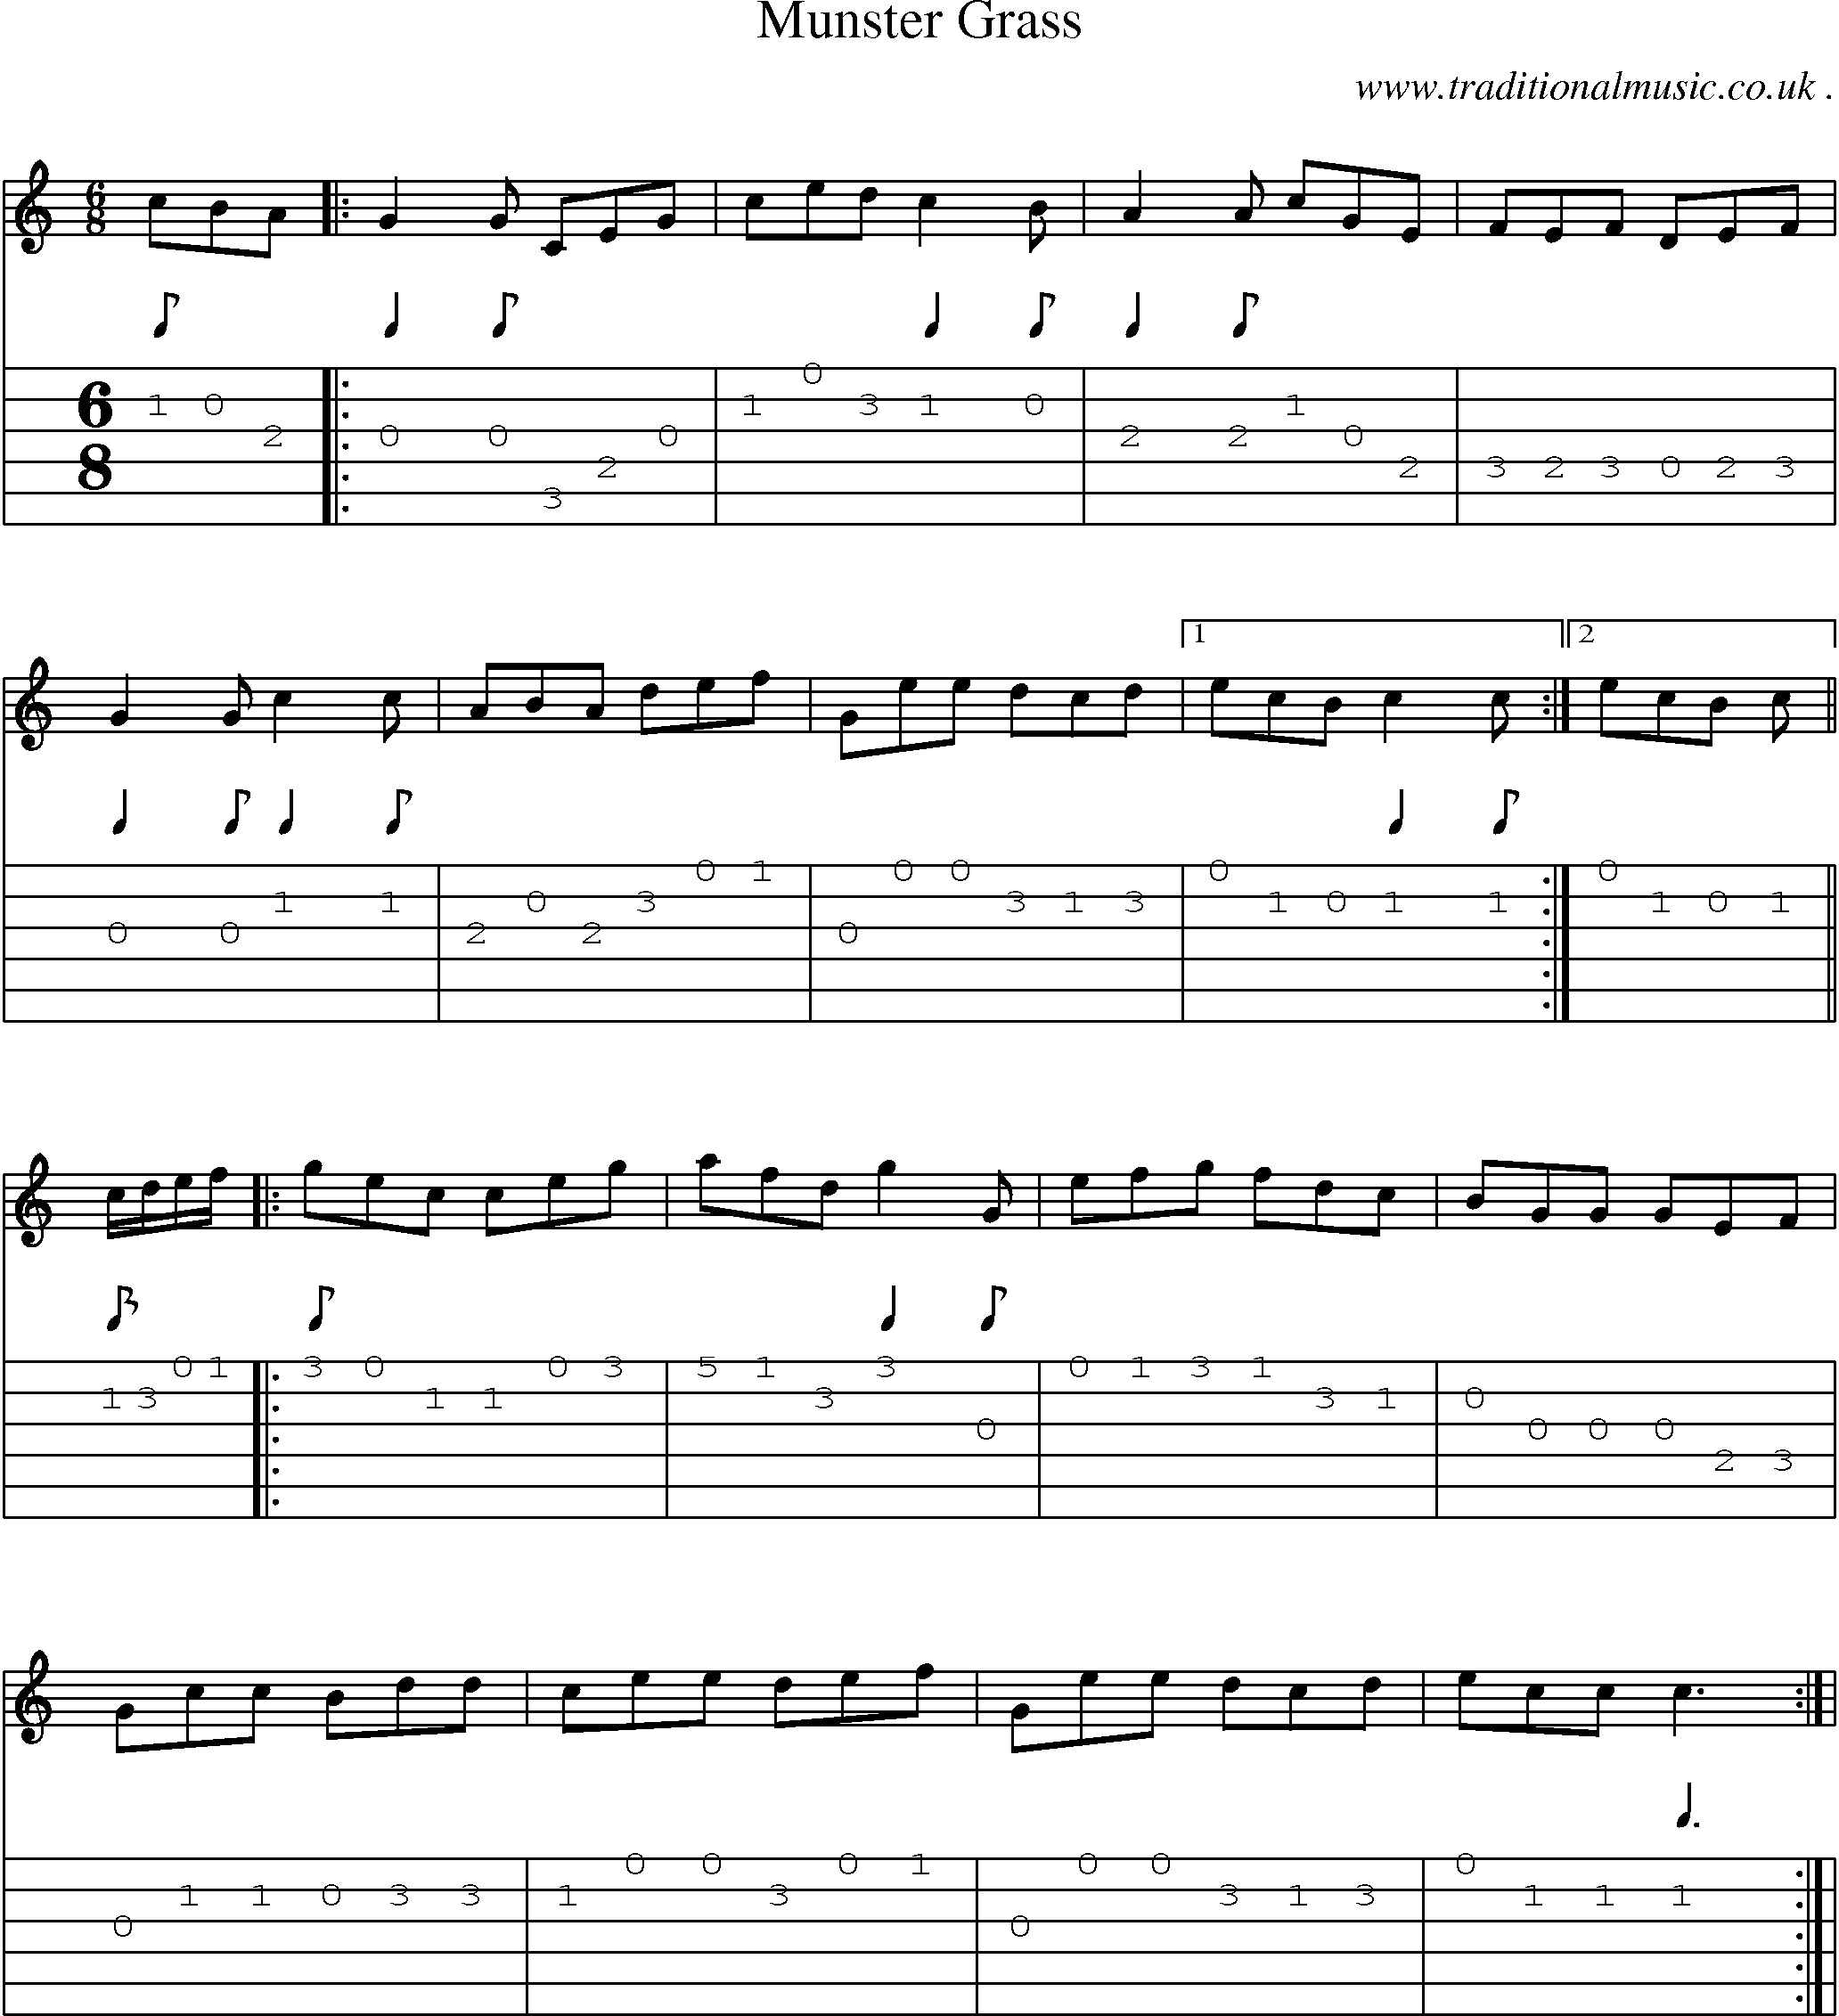 Sheet-Music and Guitar Tabs for Munster Grass